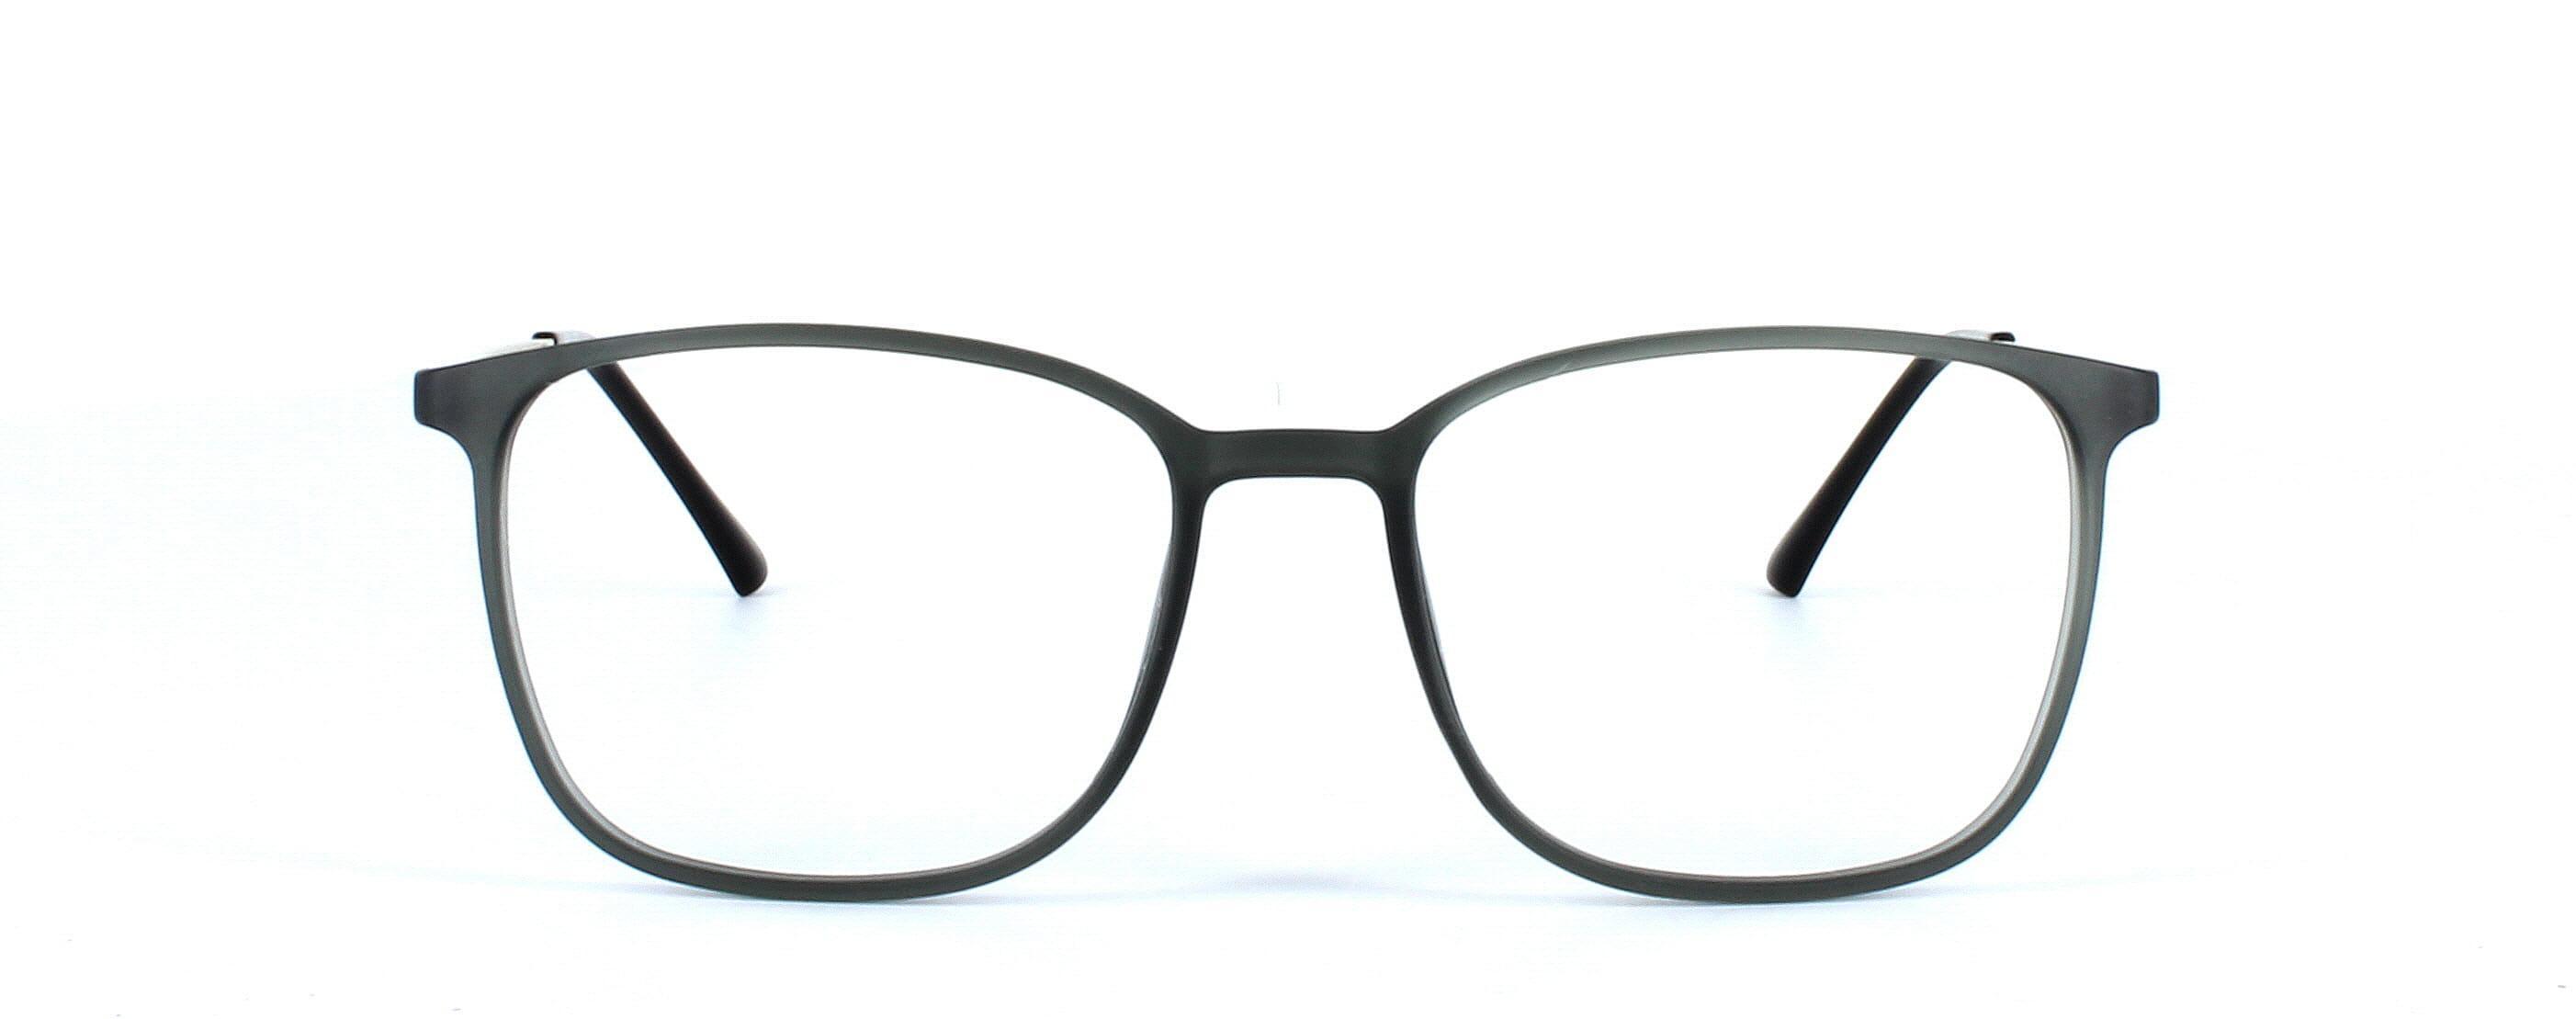 Ceres - square shaped plastic unisex glasses here in grey - image 5